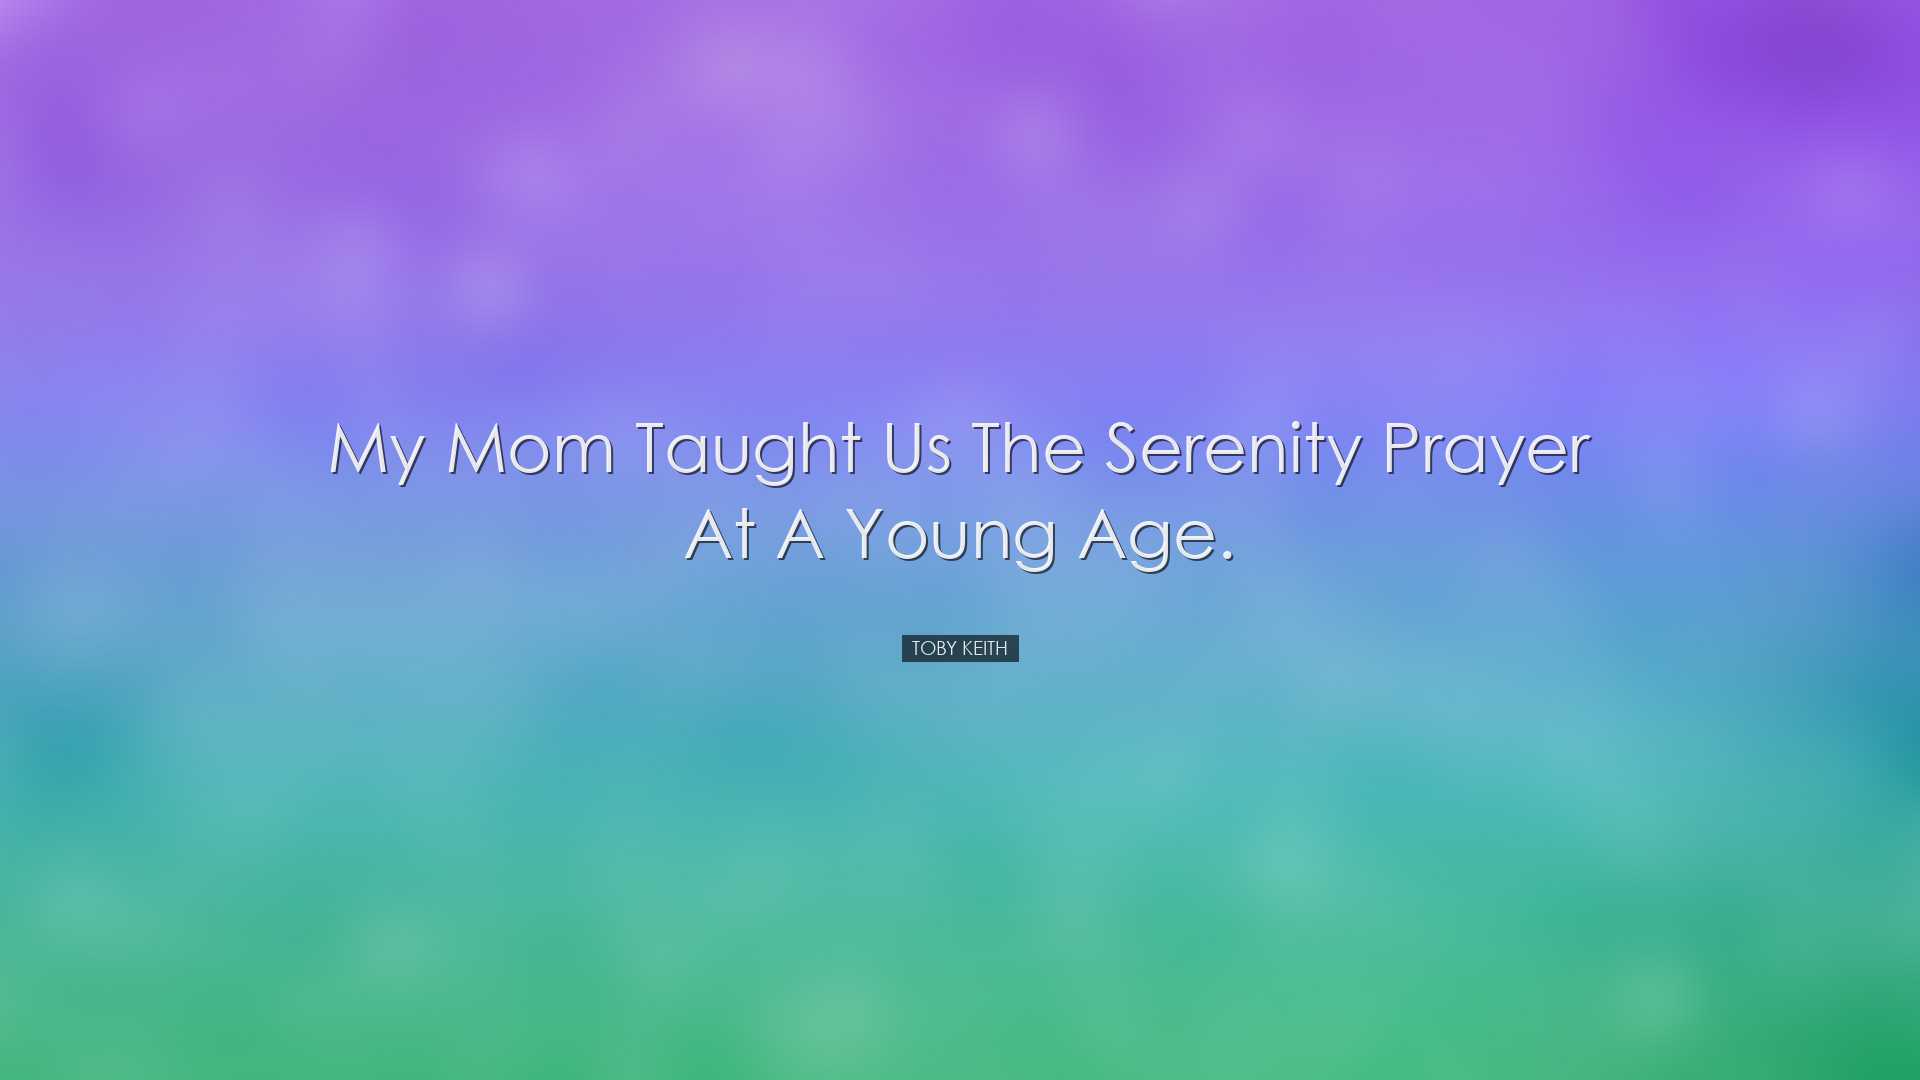 My mom taught us the Serenity Prayer at a young age. - Toby Keith